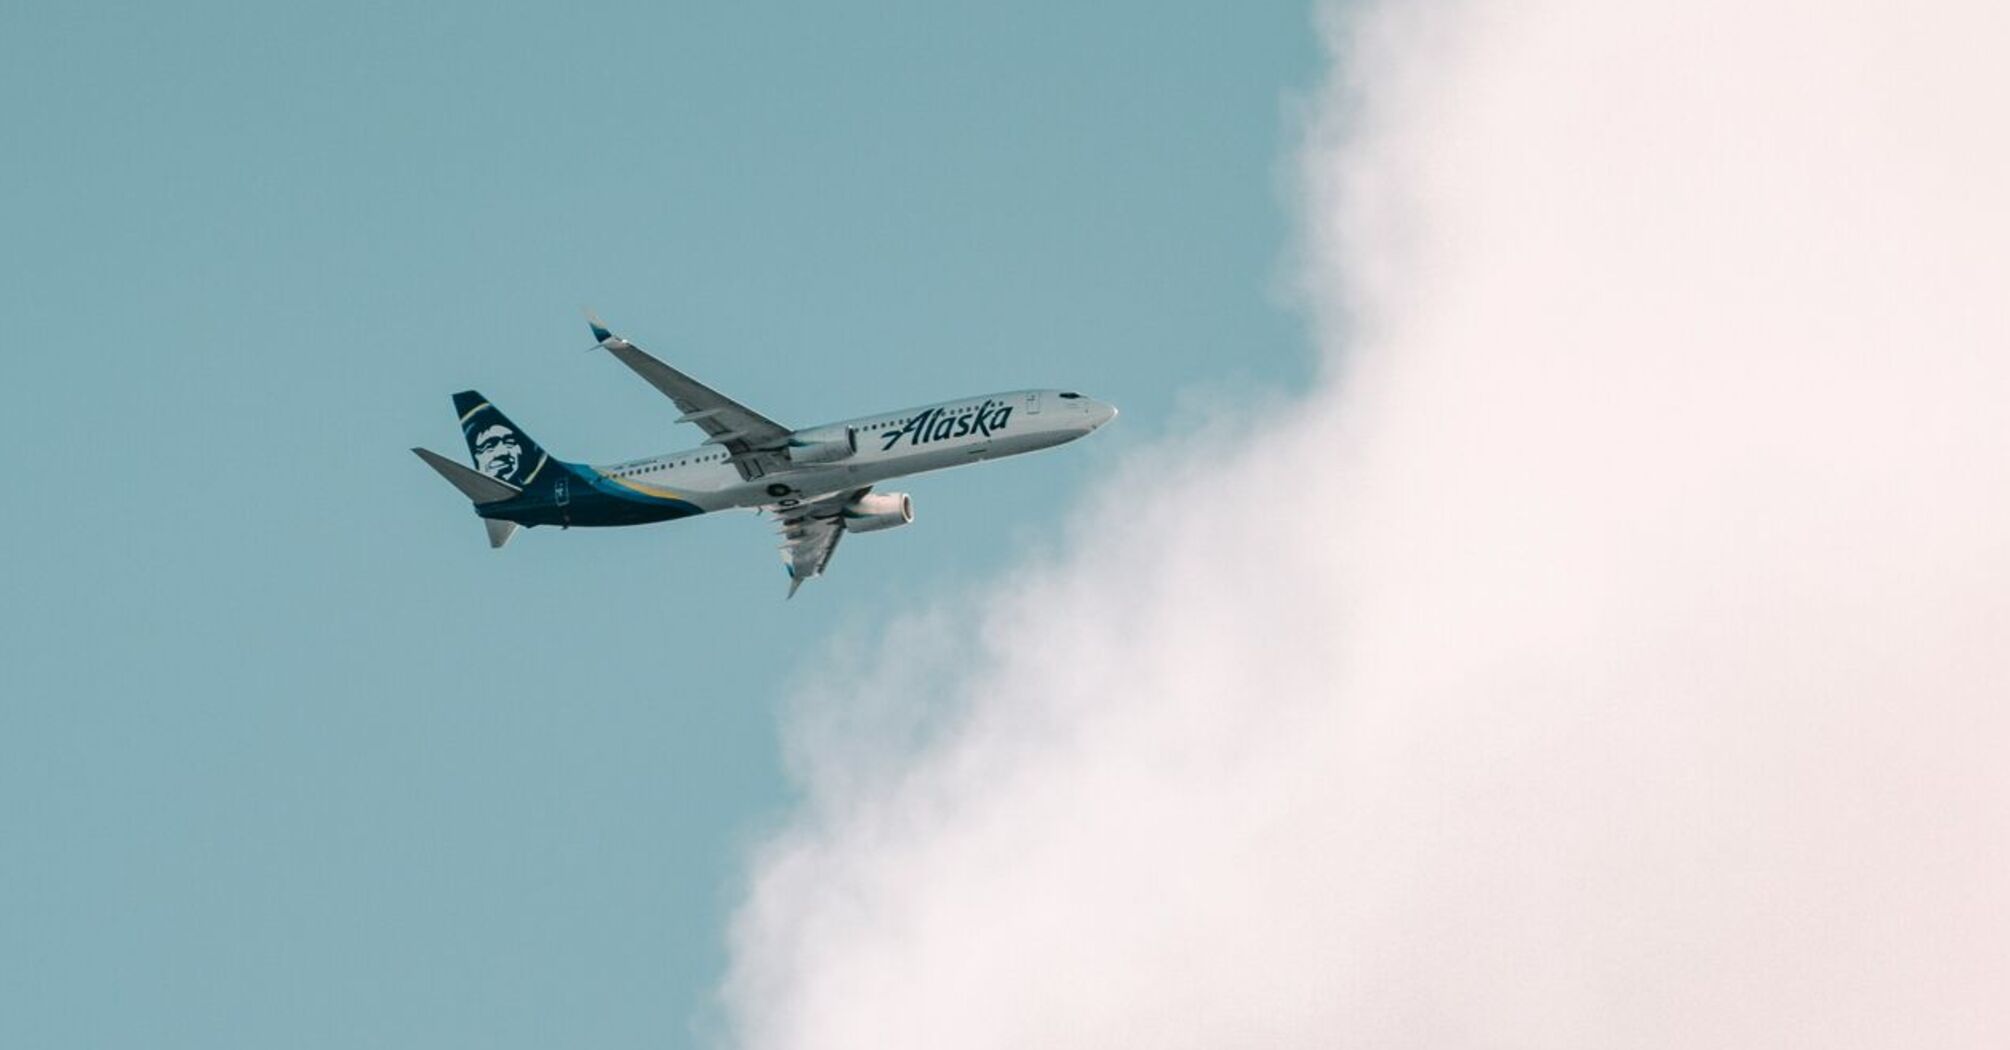 Boeing 737 Max 9 returns to the sky: Alaska Airlines resumes flights after inspections